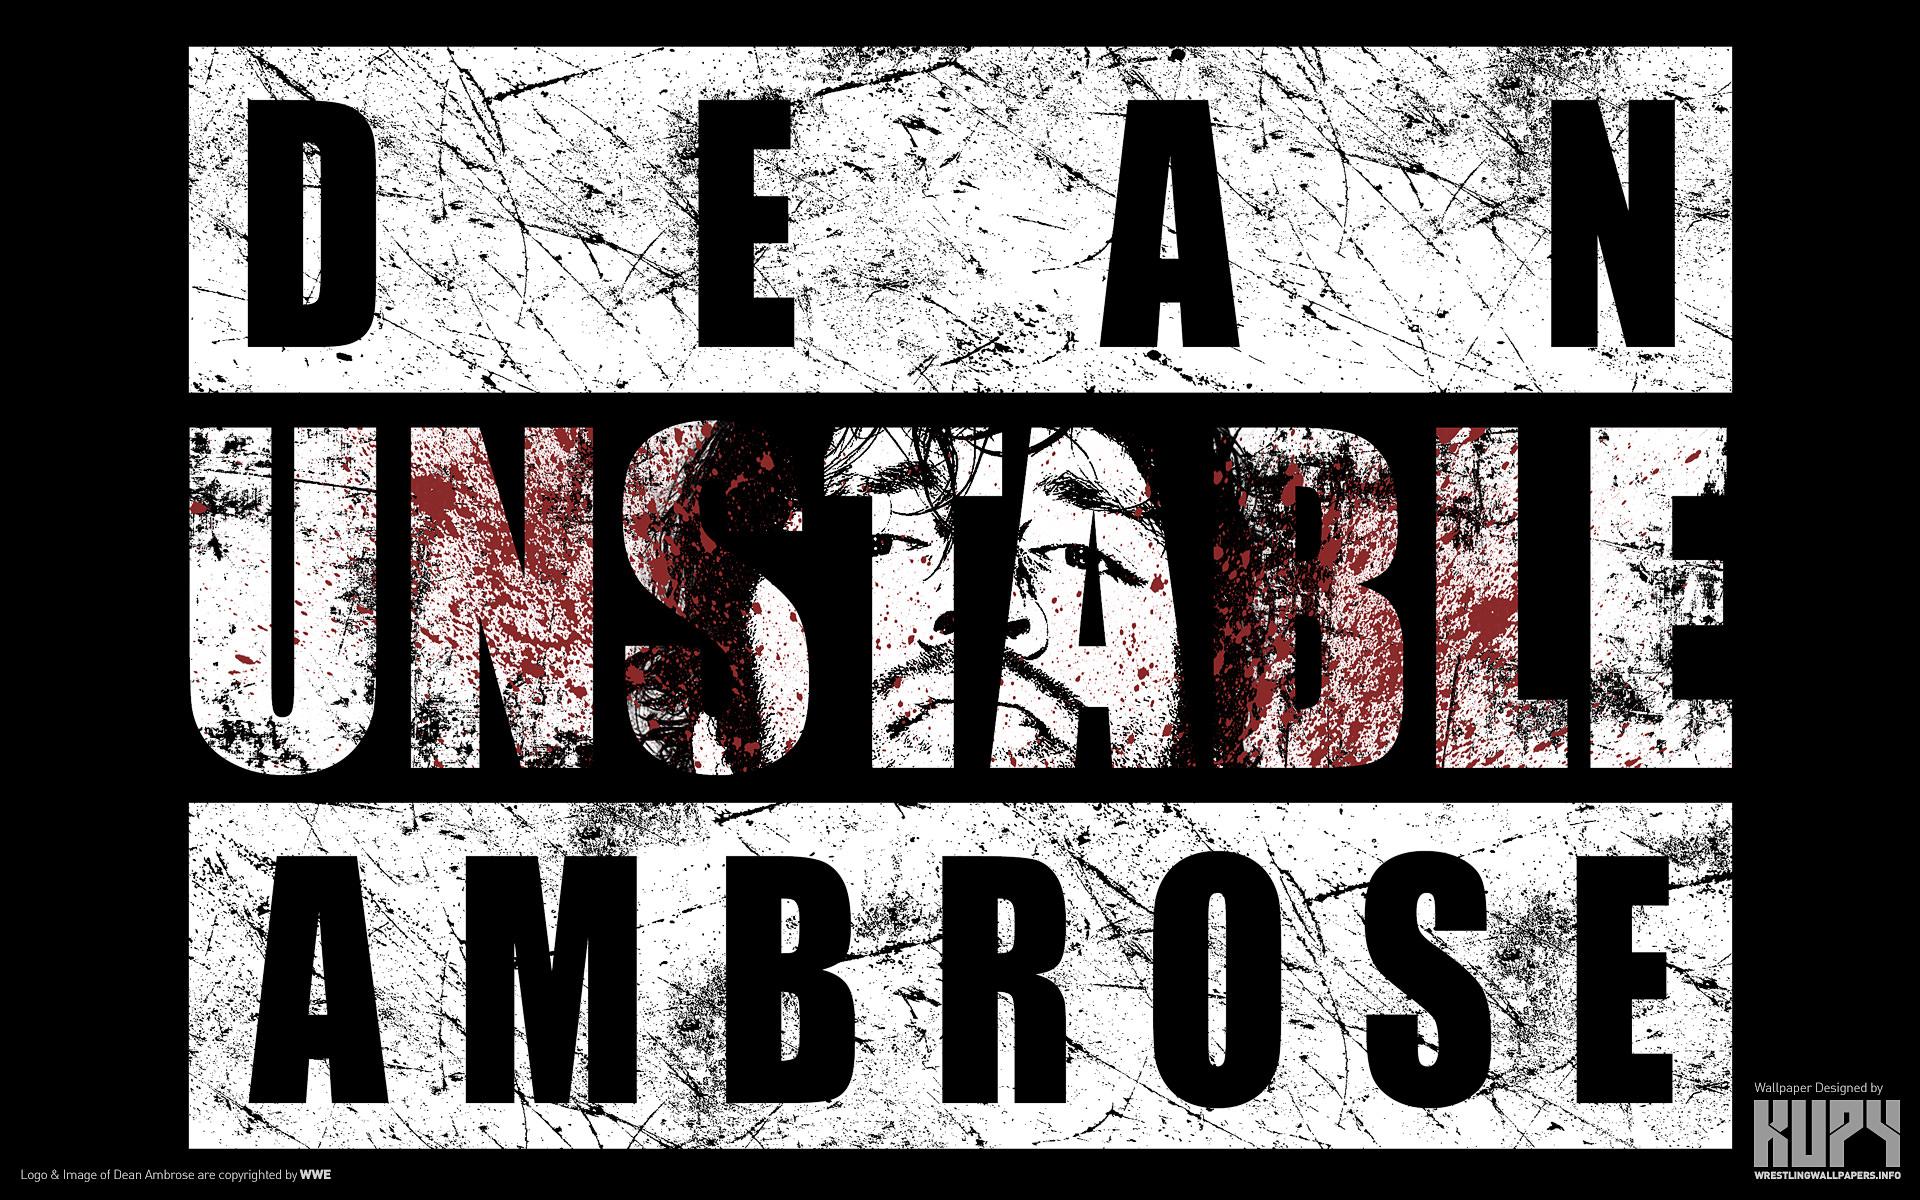 NEW Dean Ambrose 'Unstable' wallpaper! Available in 4K resolution